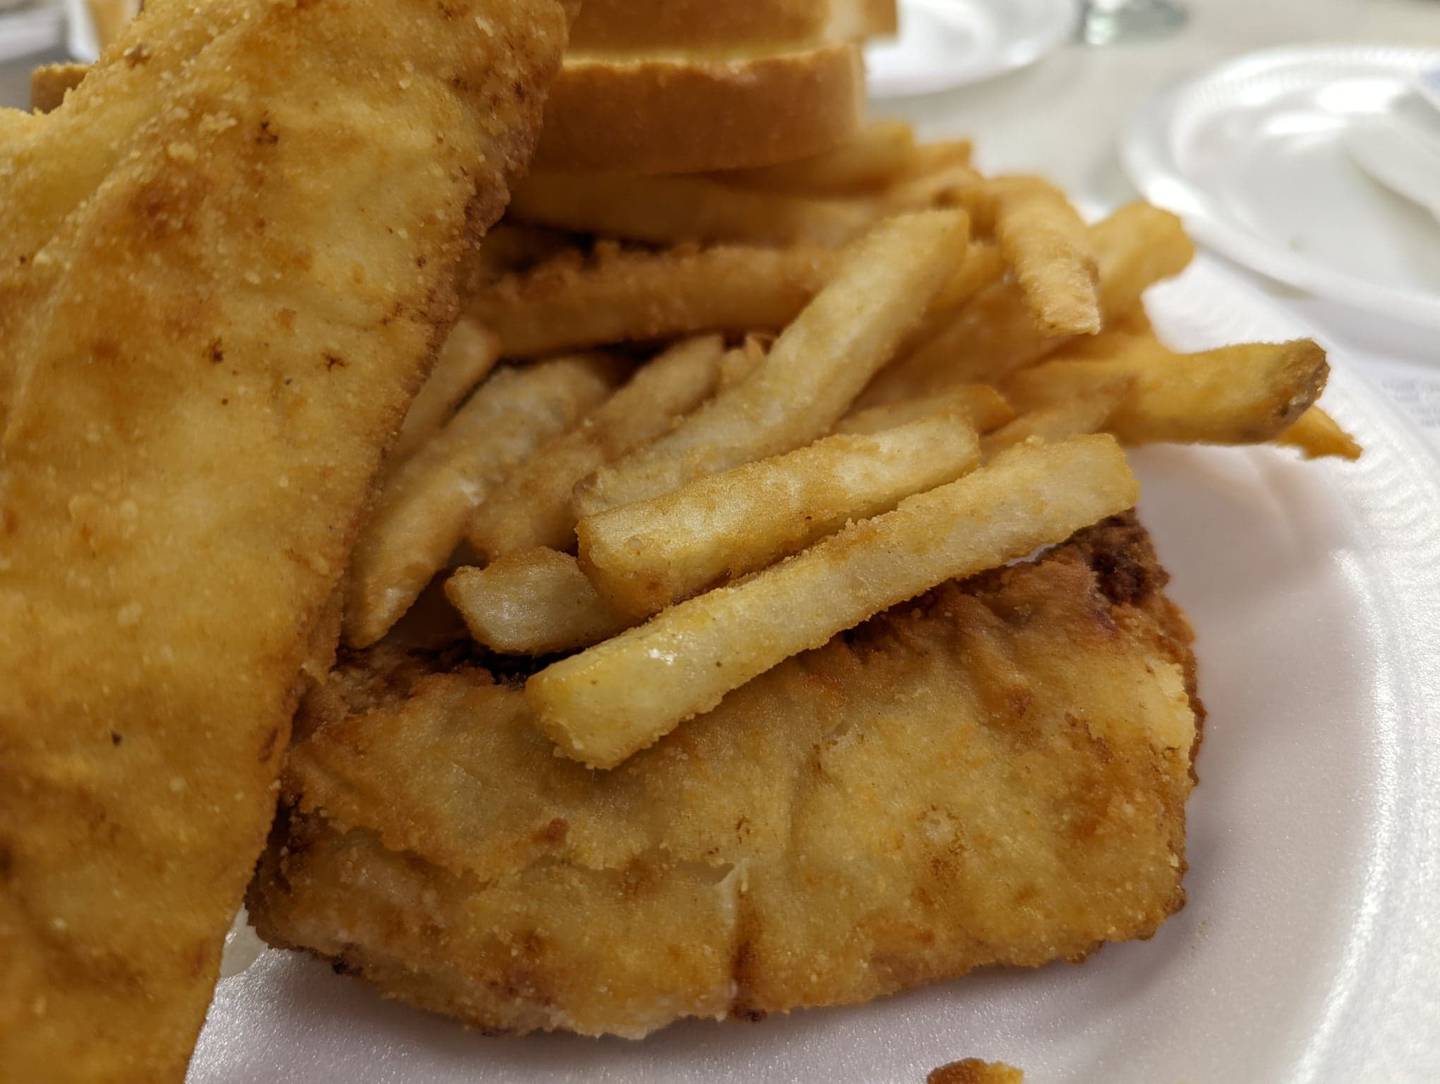 The Knights of Columbus Holy Trinity Council No. 4400 on Joliet's East side offers a one-, two- or three-piece fish dinner of either Alaskan cod (the Knights’ specialty, according to the menu) or Alaskan walleye. Prices are $11.50, $15.50 and $17.50 for the cod dinners, and $8.50, $11.25 and $13.75 for the walleye. Dinners come with two slices of bread, battered fries and a vinegar coleslaw.